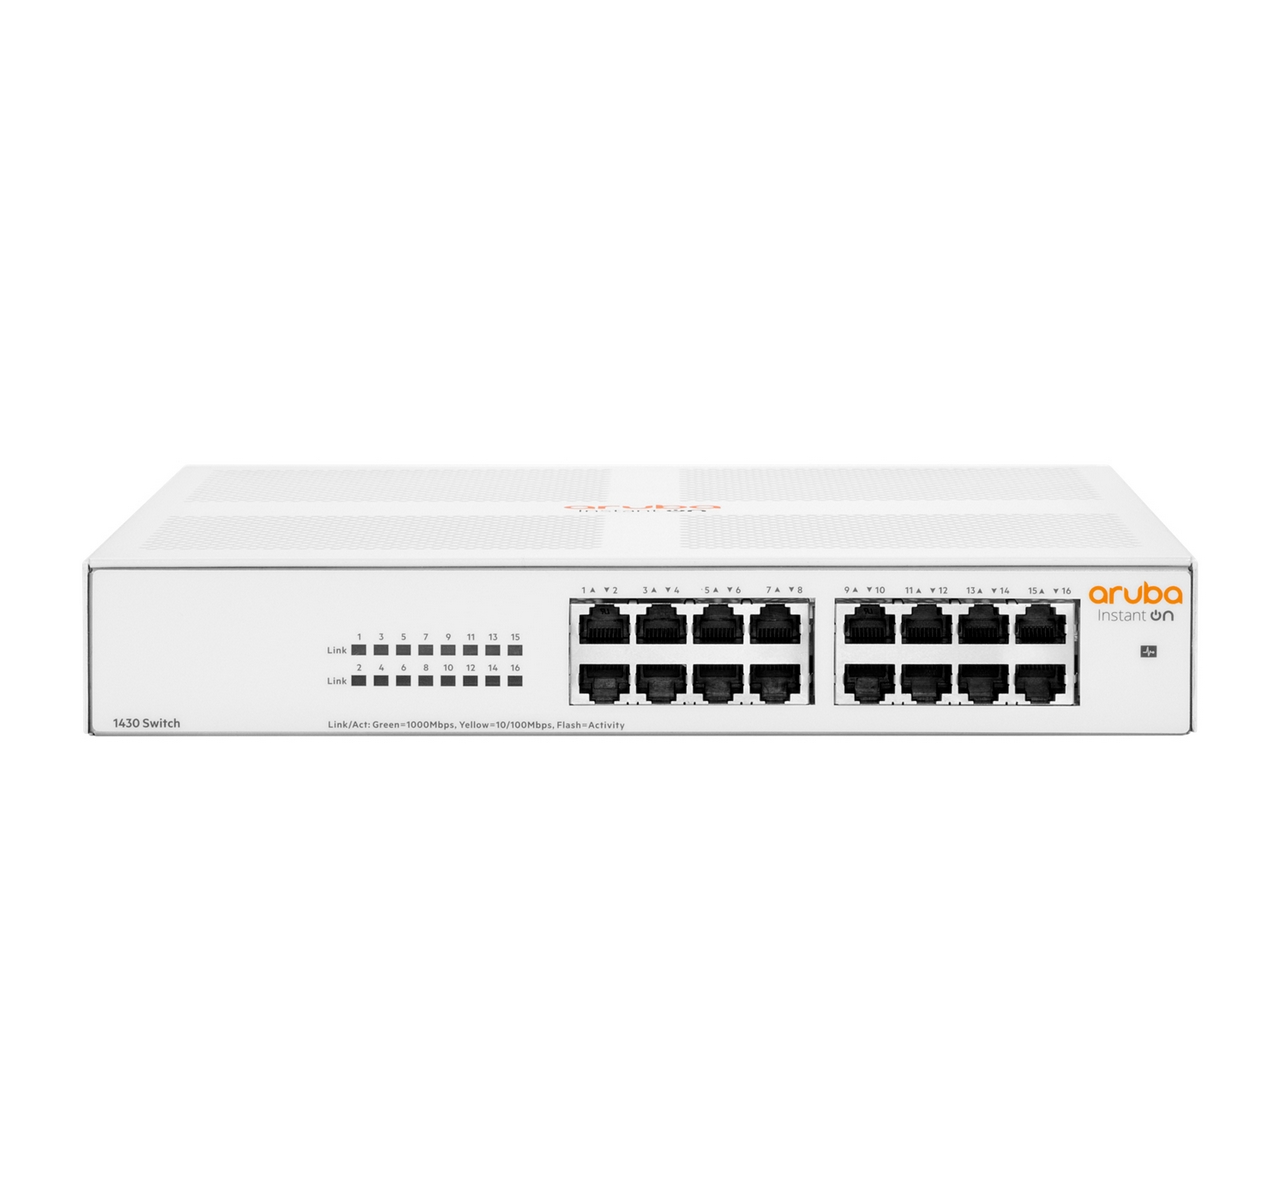 HPE Aruba Instant On 1430 16G Switch (p/n- R8R47A)